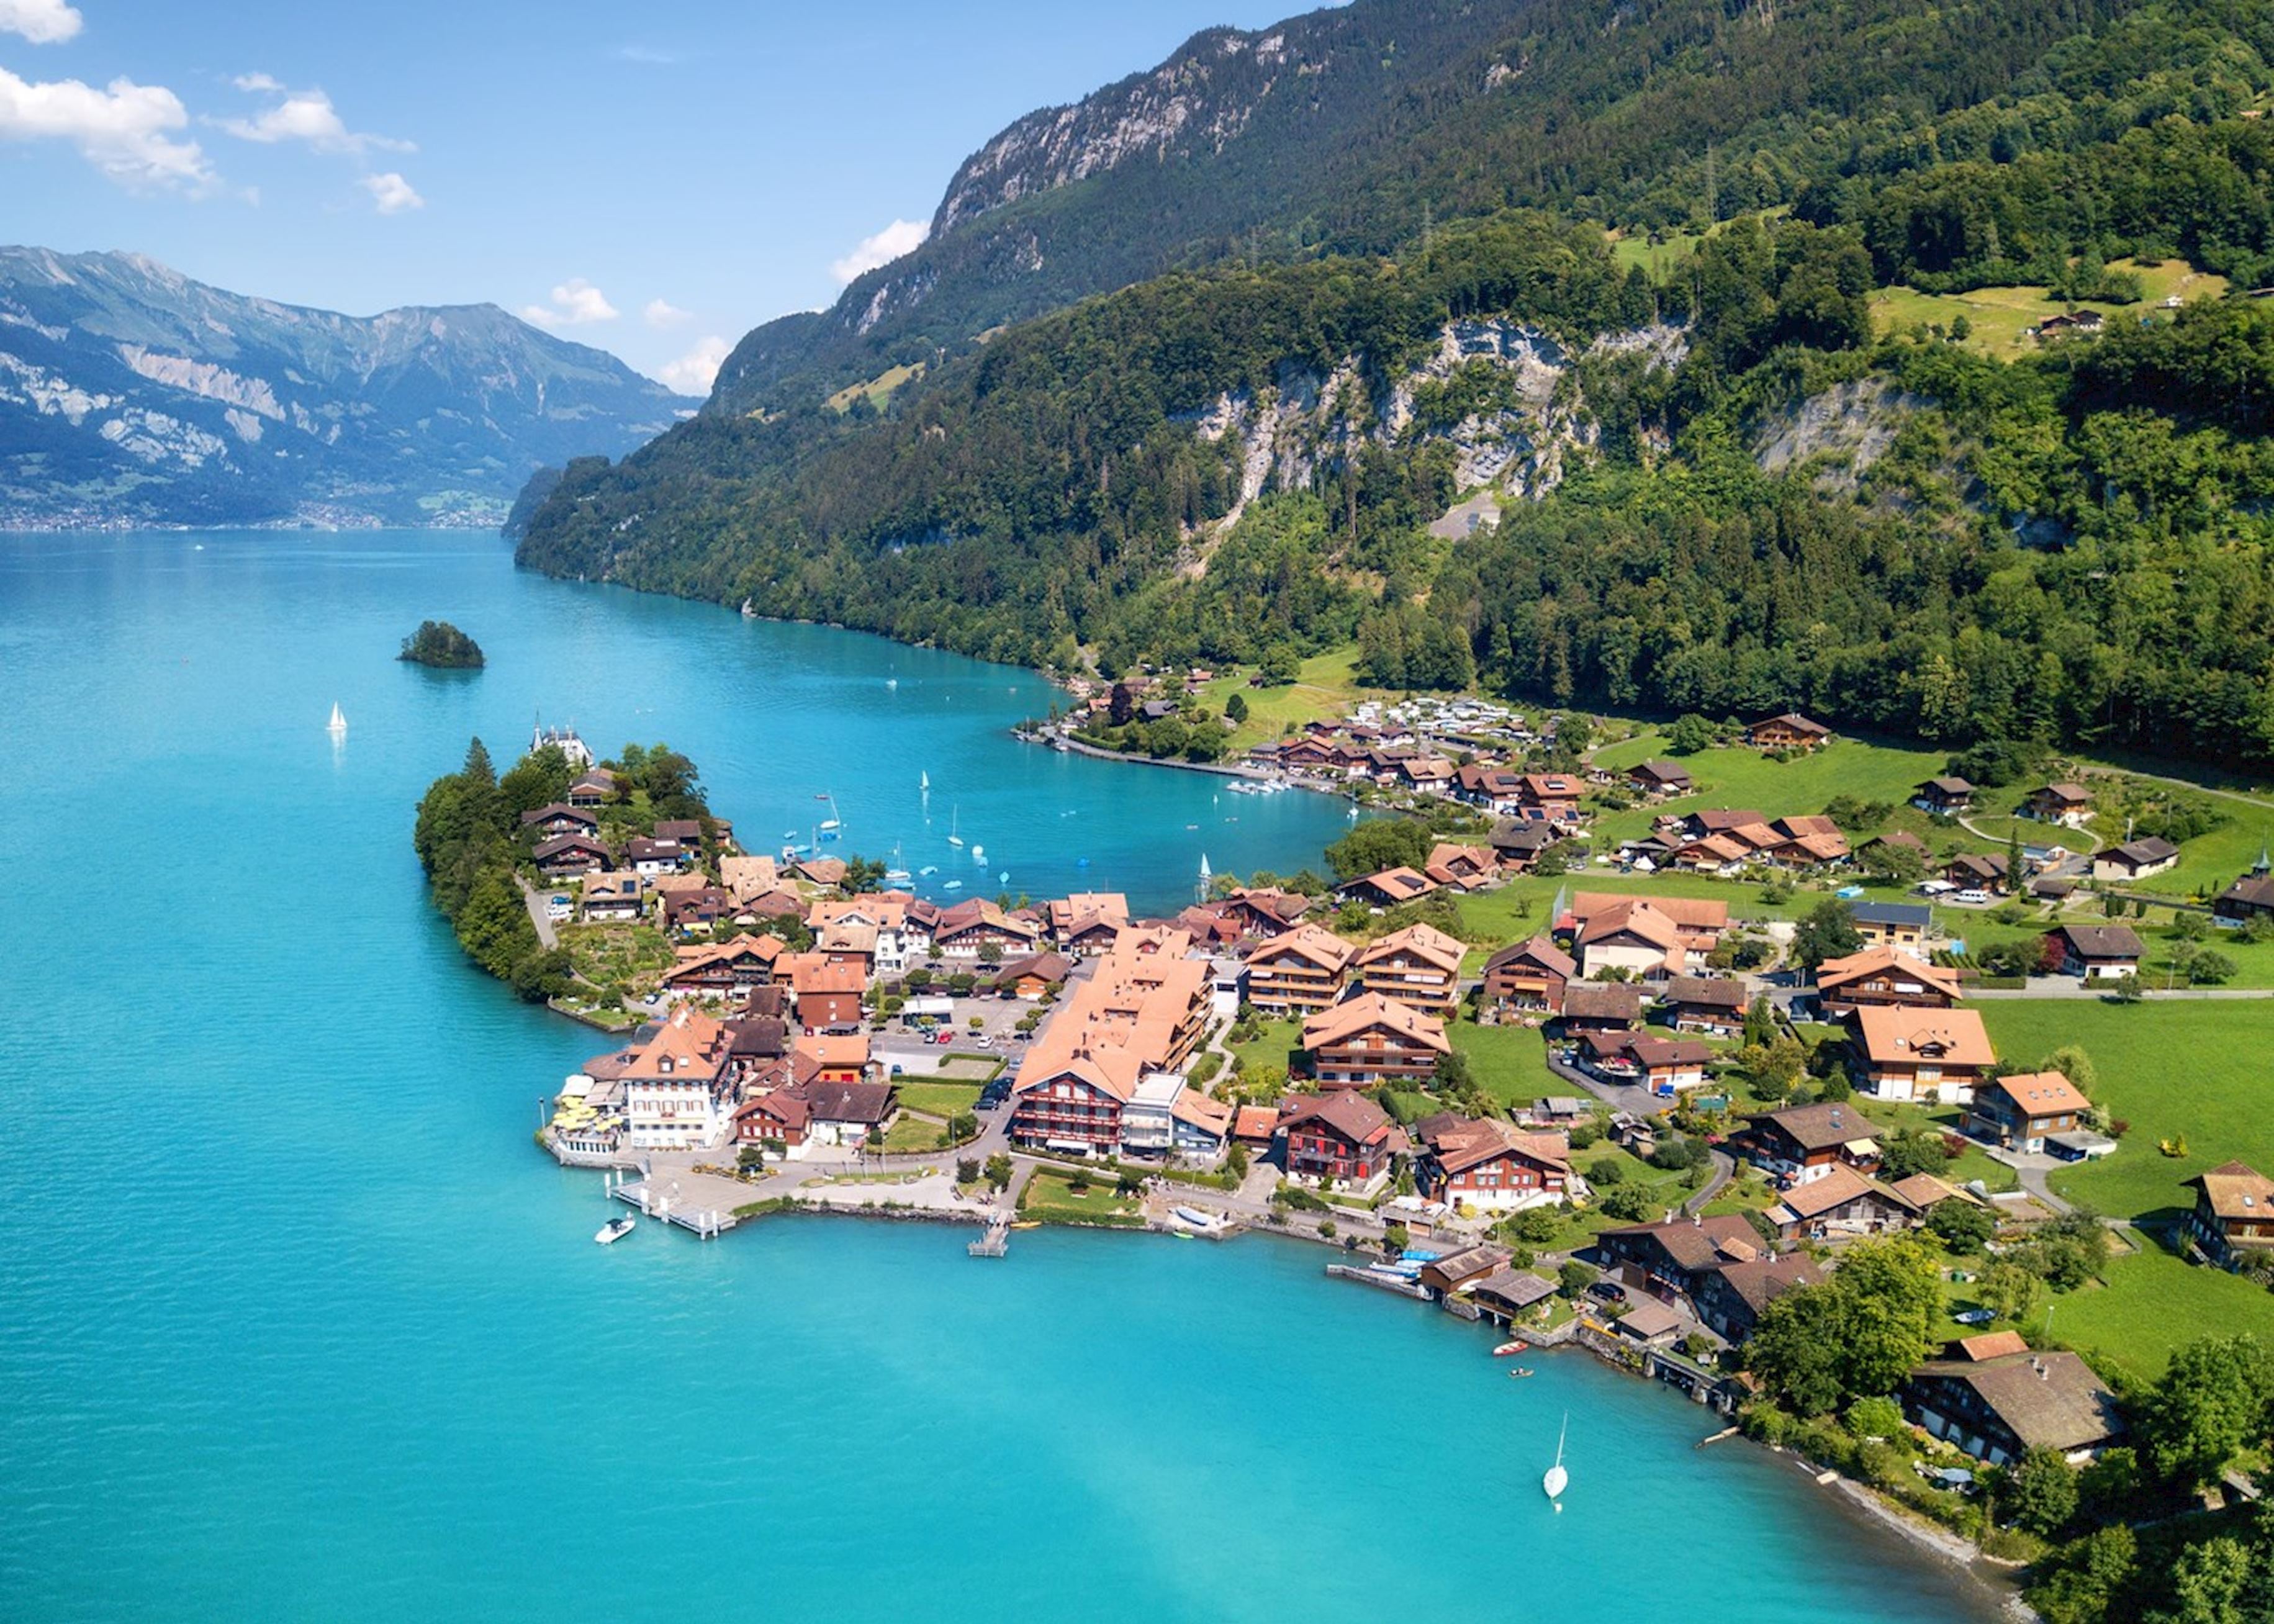 10 The most beautiful places to visit in switzerland and info